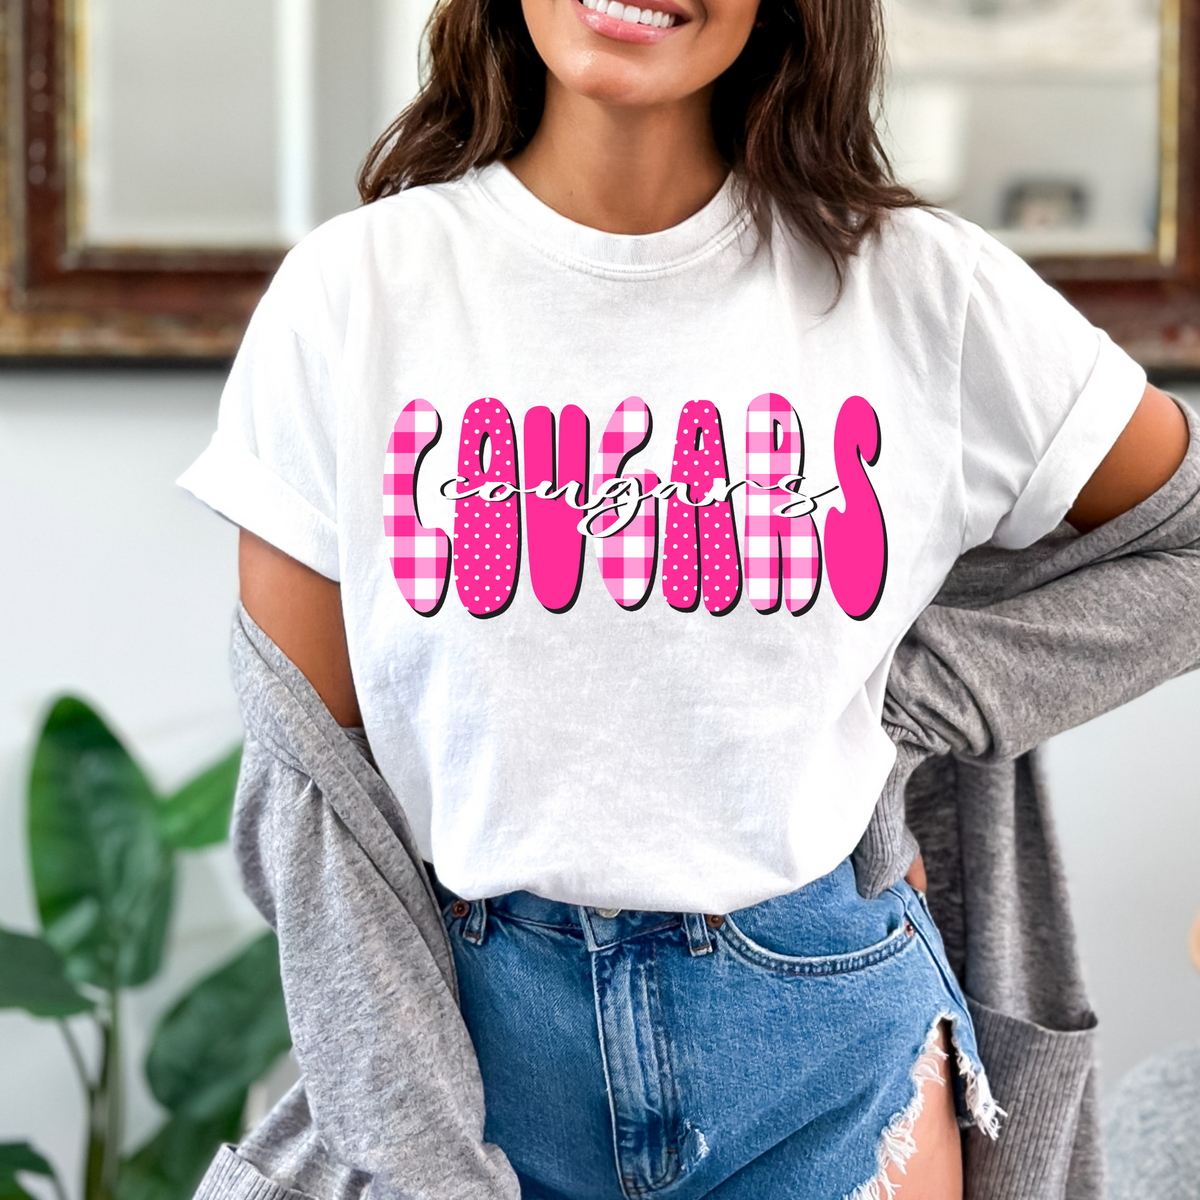 Cougars Gingham Dots Groovy Script in Pink & White Digital Design, PNG